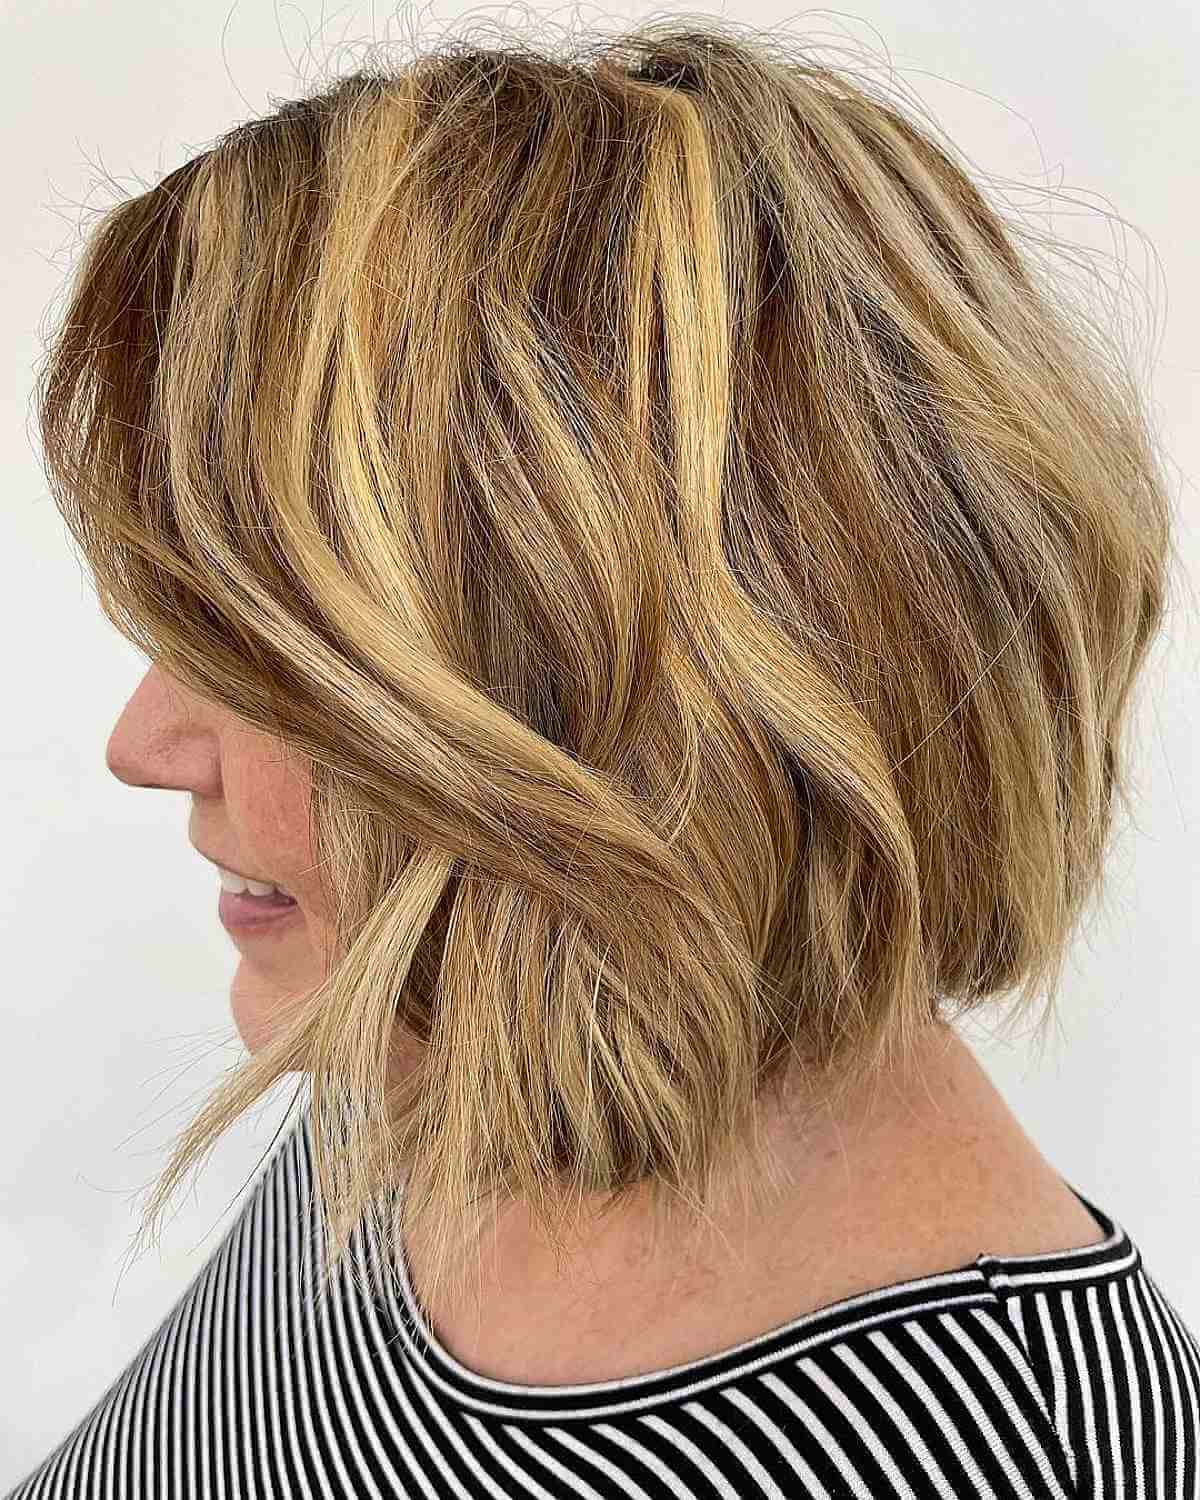 Short Wavy Bob for Women Over Fifty